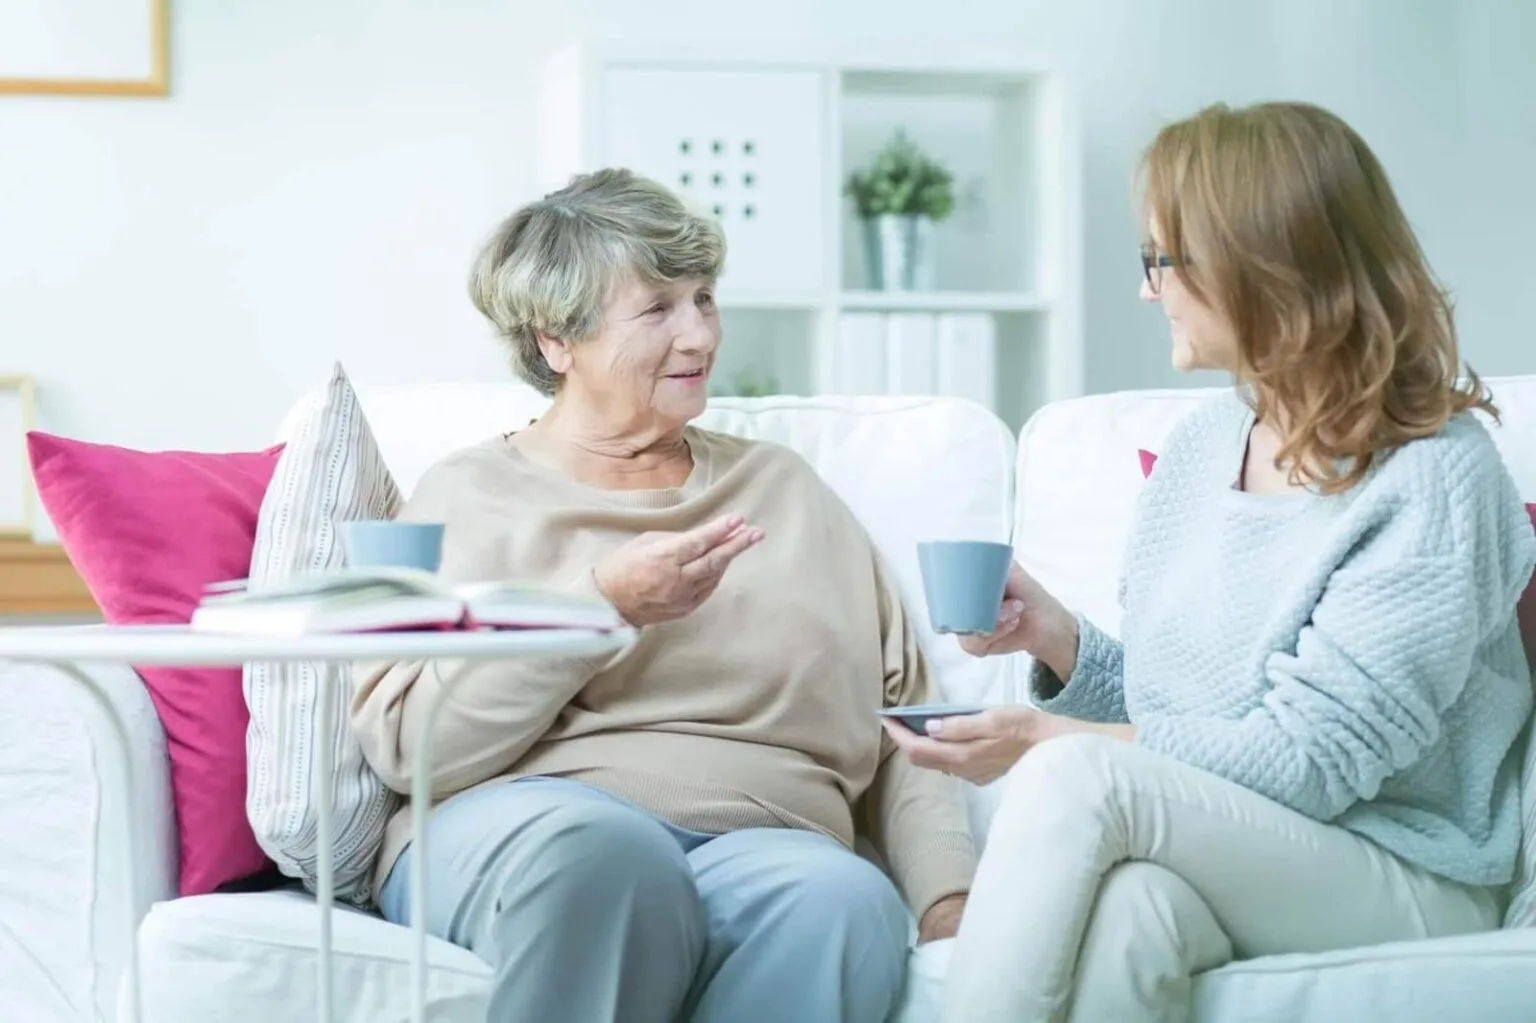 How to Find a Home Care Provider